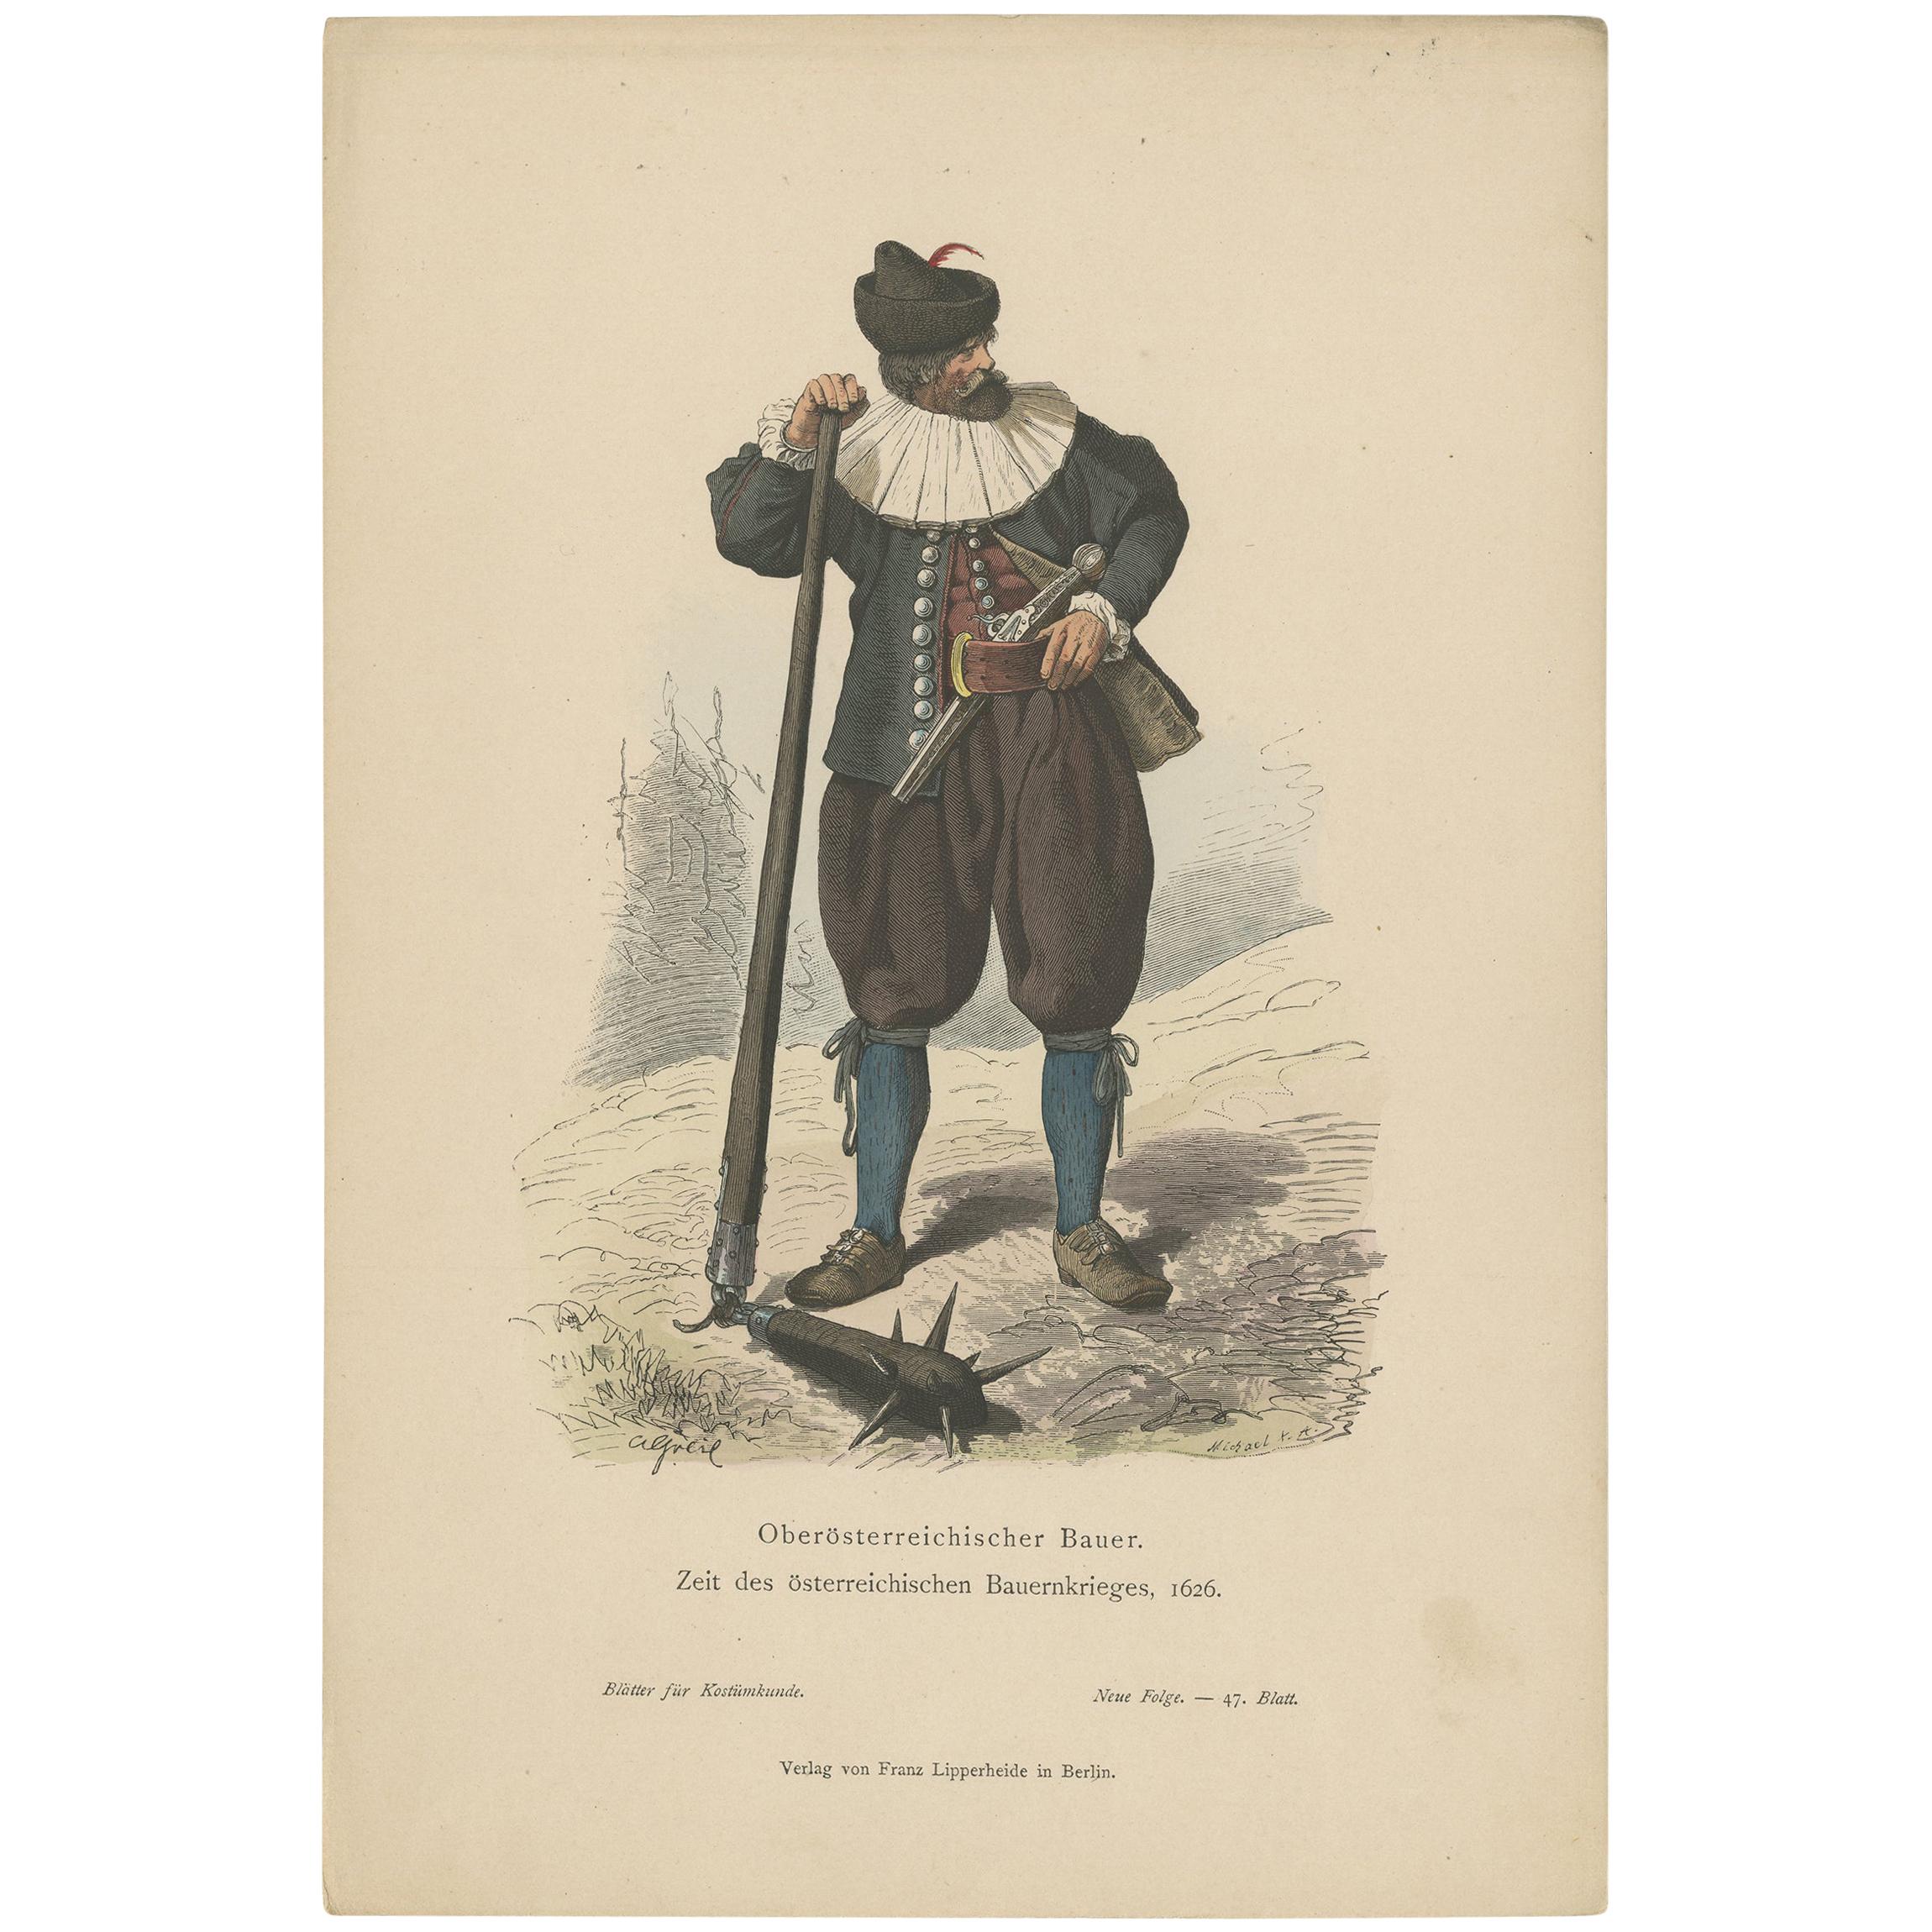 Antique Print of a Farmer from Upper Austria During the Peasant's War of 1626